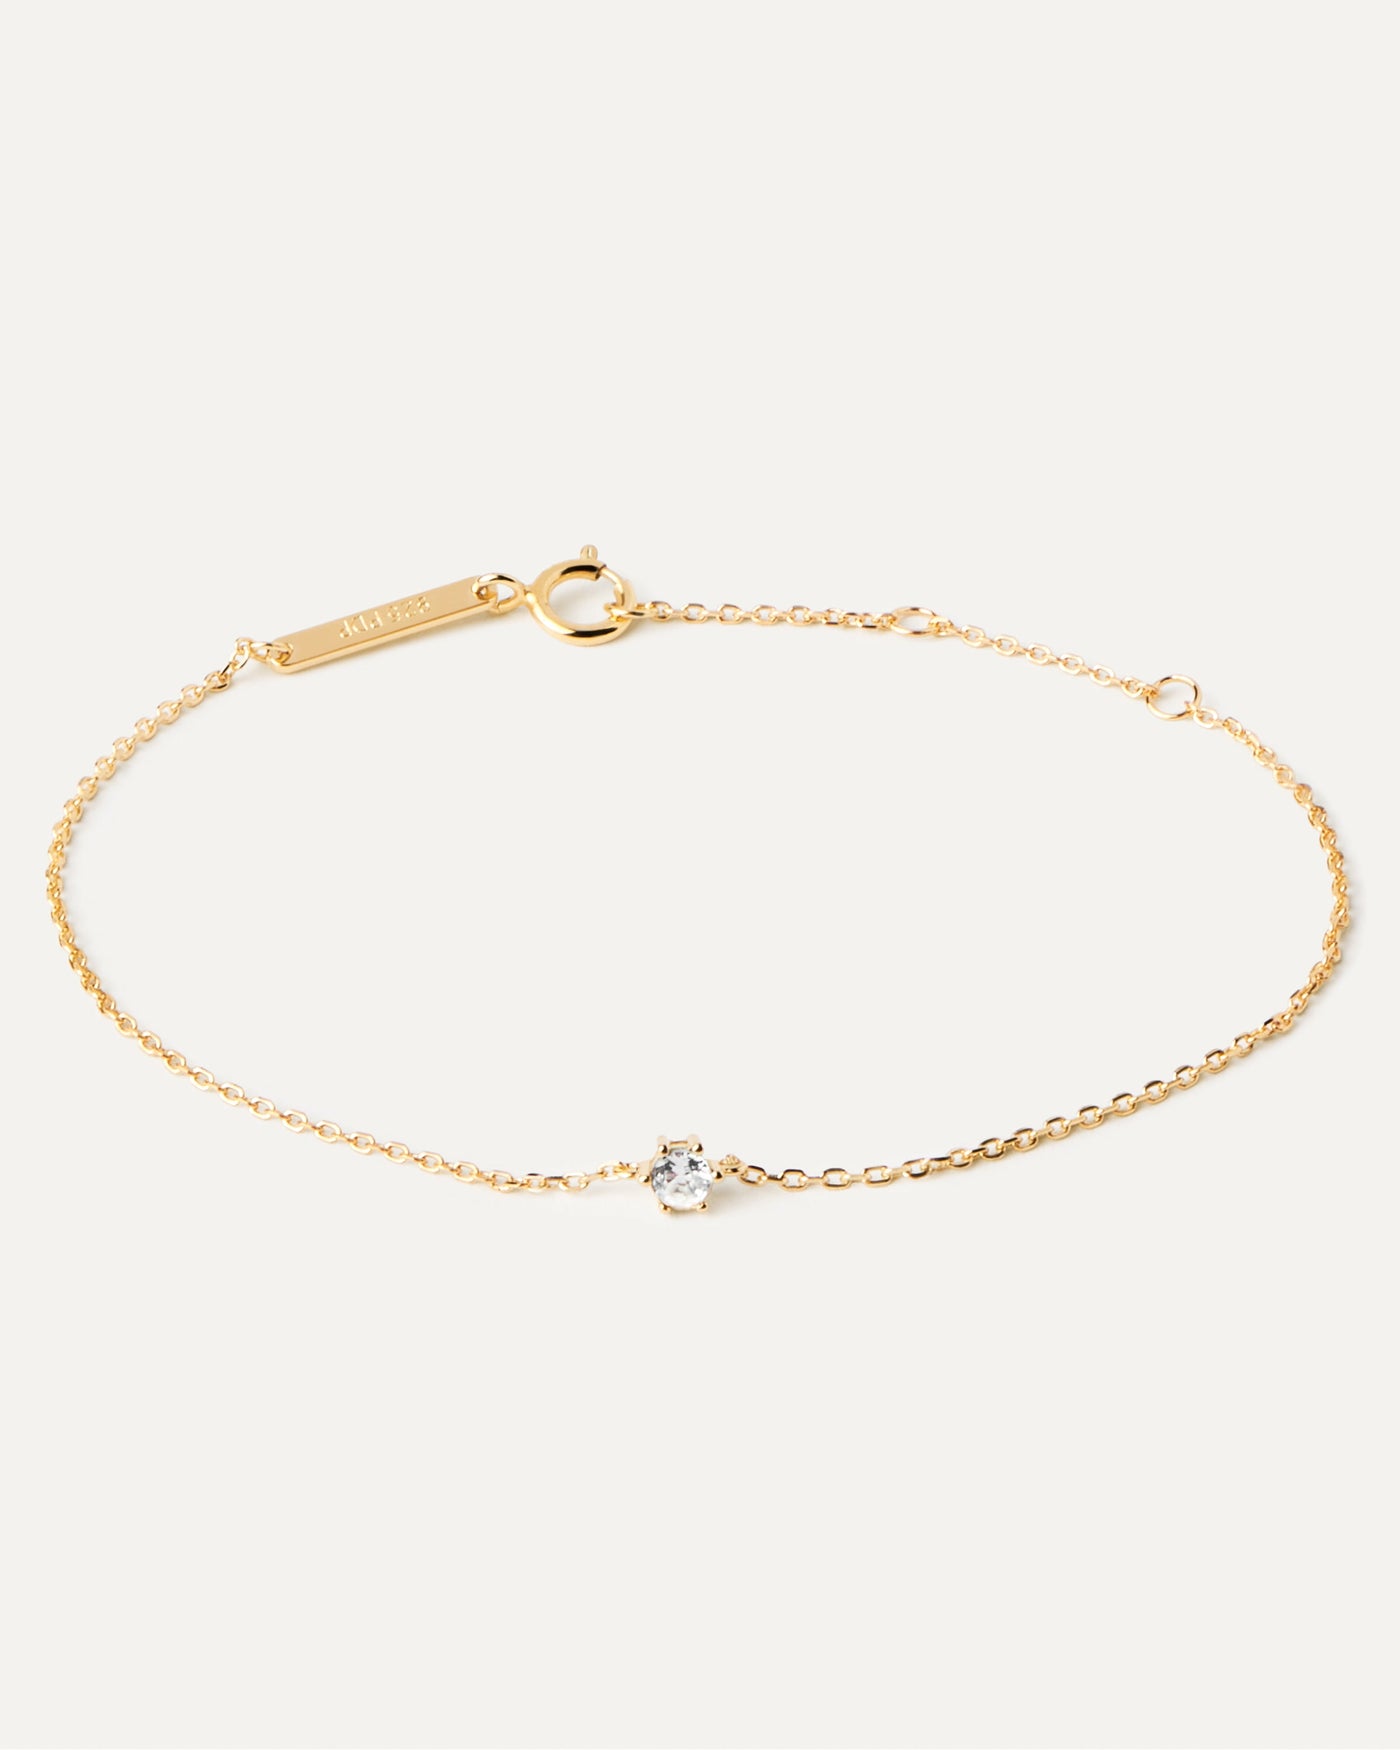 2023 Selection | White Solitary Bracelet. Thin chain bracelet in 18k gold plated silver and a white zirconia. Get the latest arrival from PDPAOLA. Place your order safely and get this Best Seller. Free Shipping.